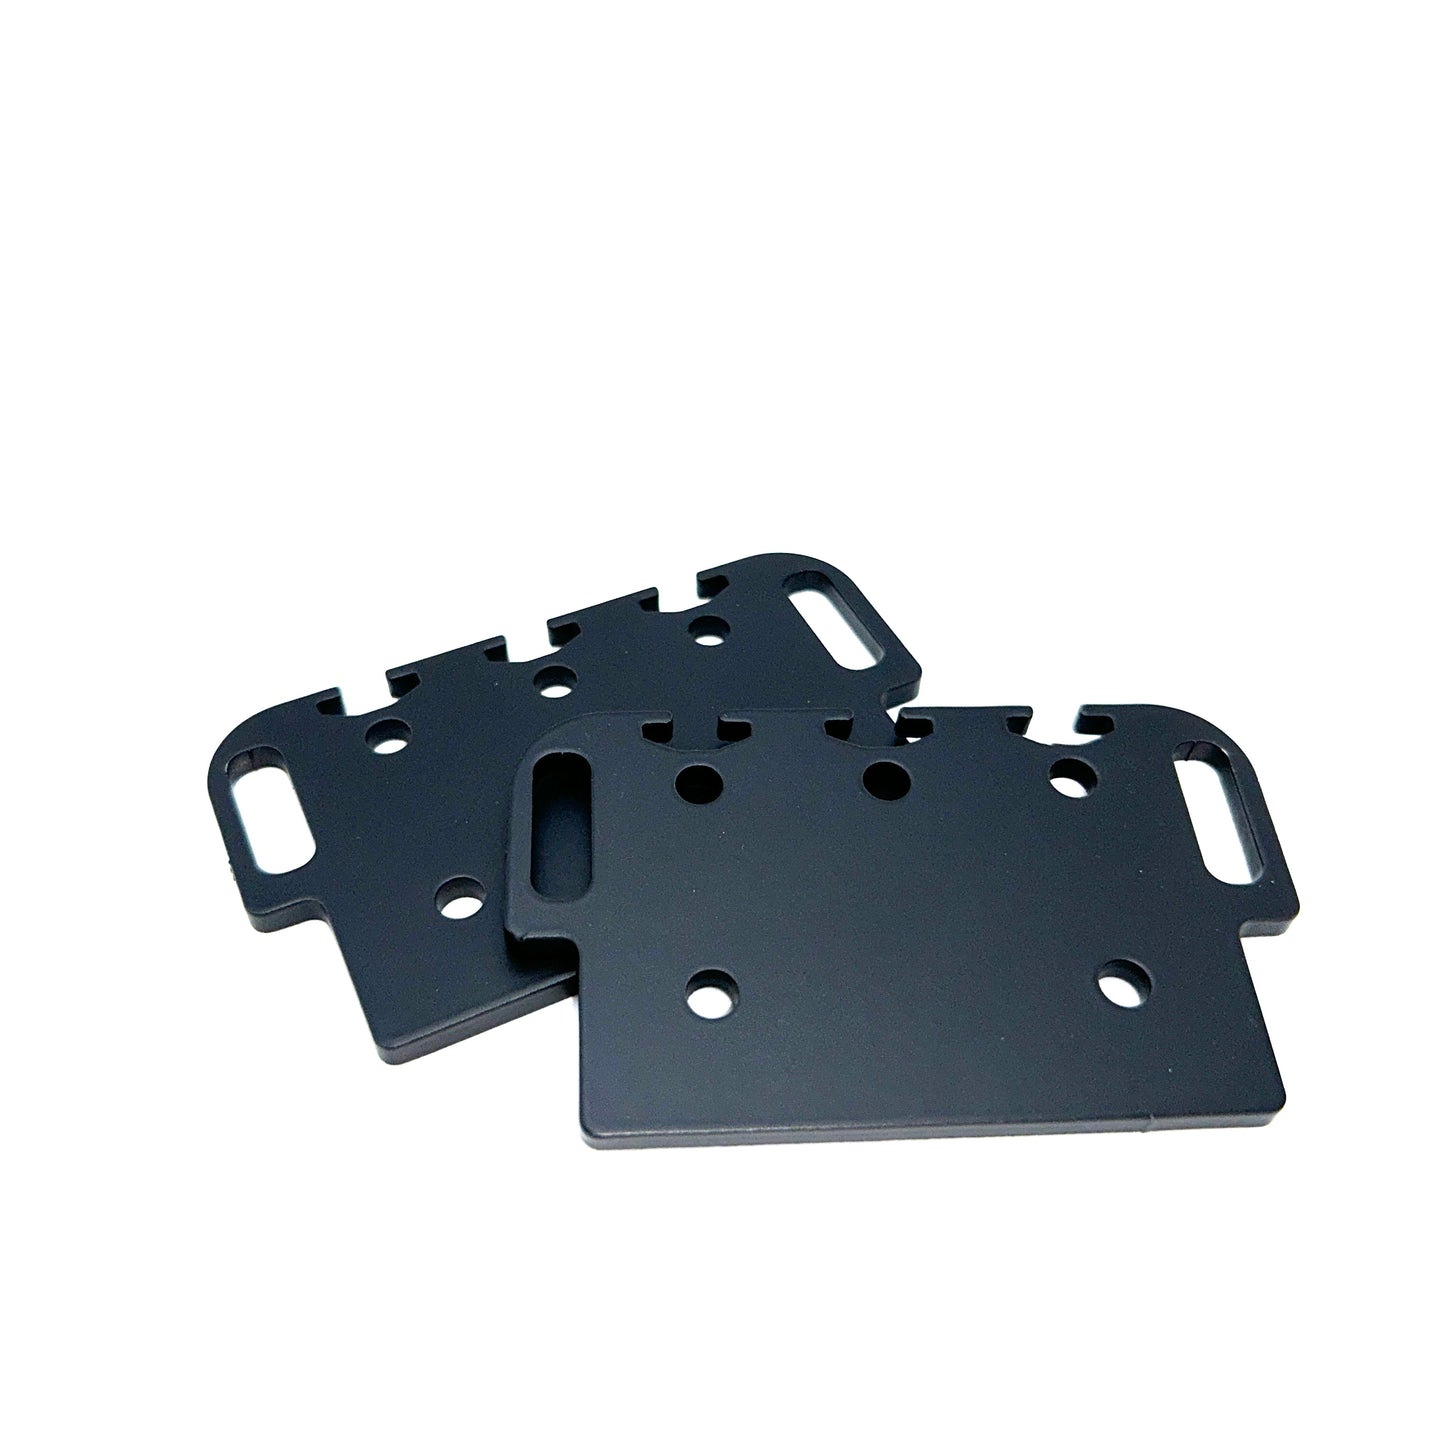 Extrusion Crossbar Mounts for Stock Racks | 3" Wide